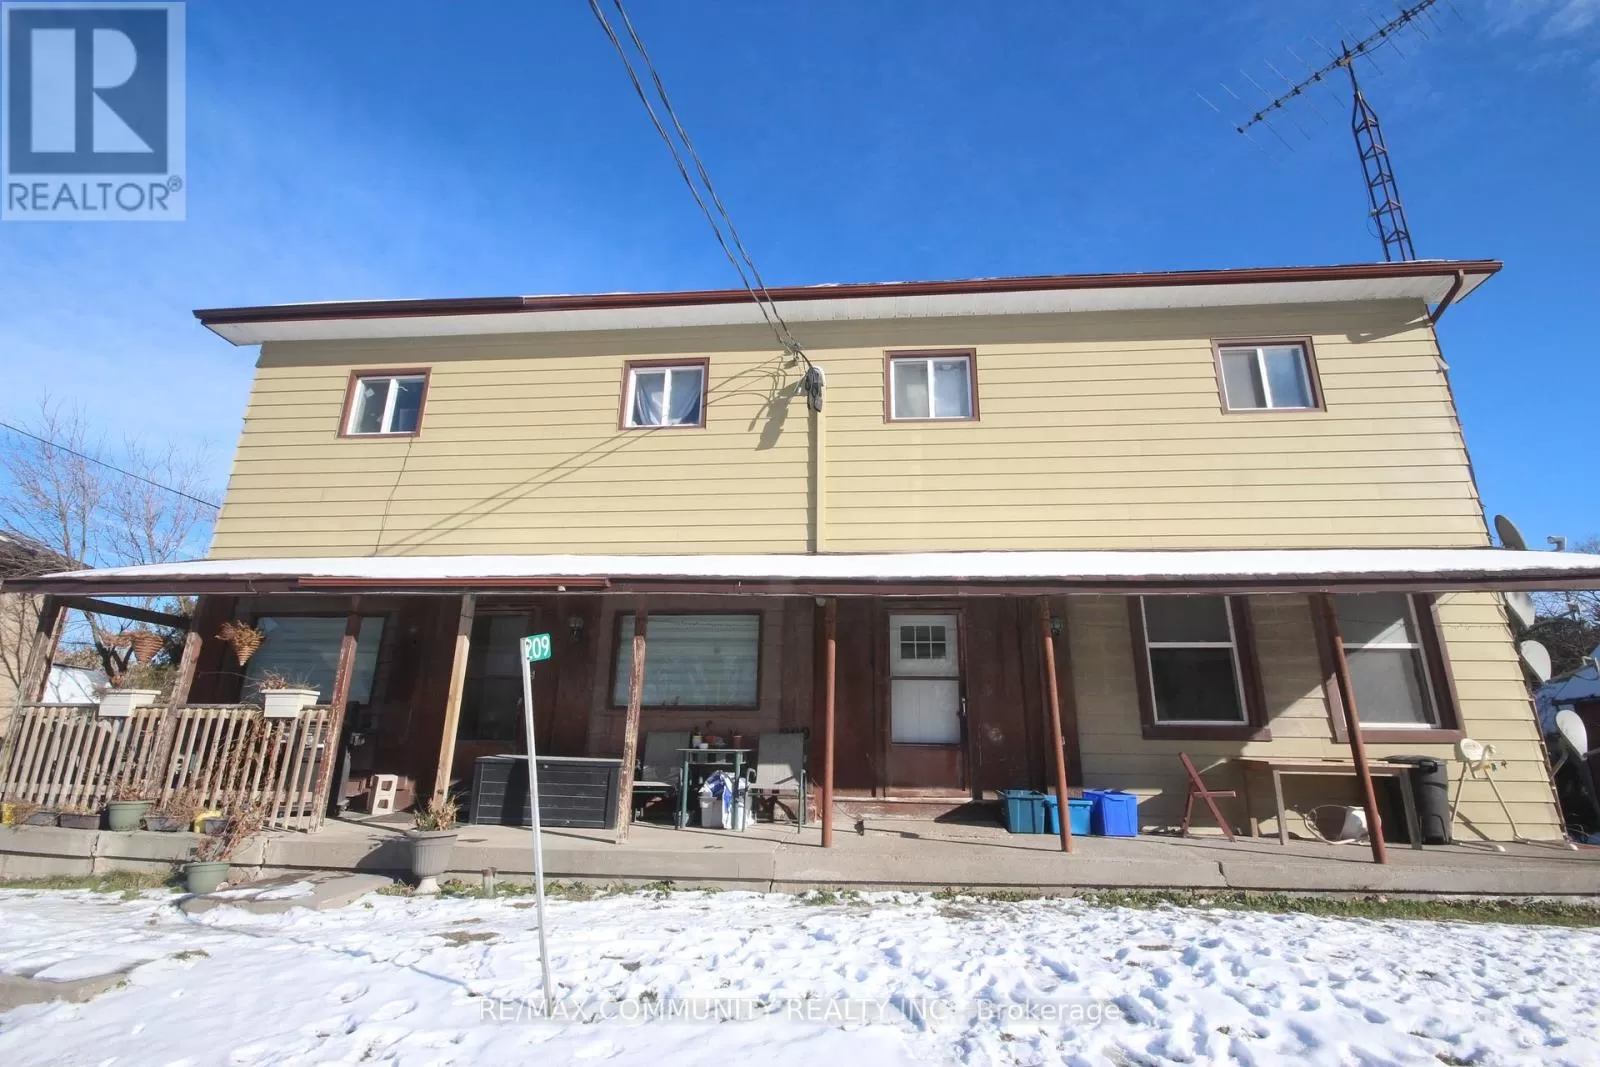 Multi-Family for rent: 209 County Rd 28, Otonabee-South Monaghan, Ontario K0L 1B0